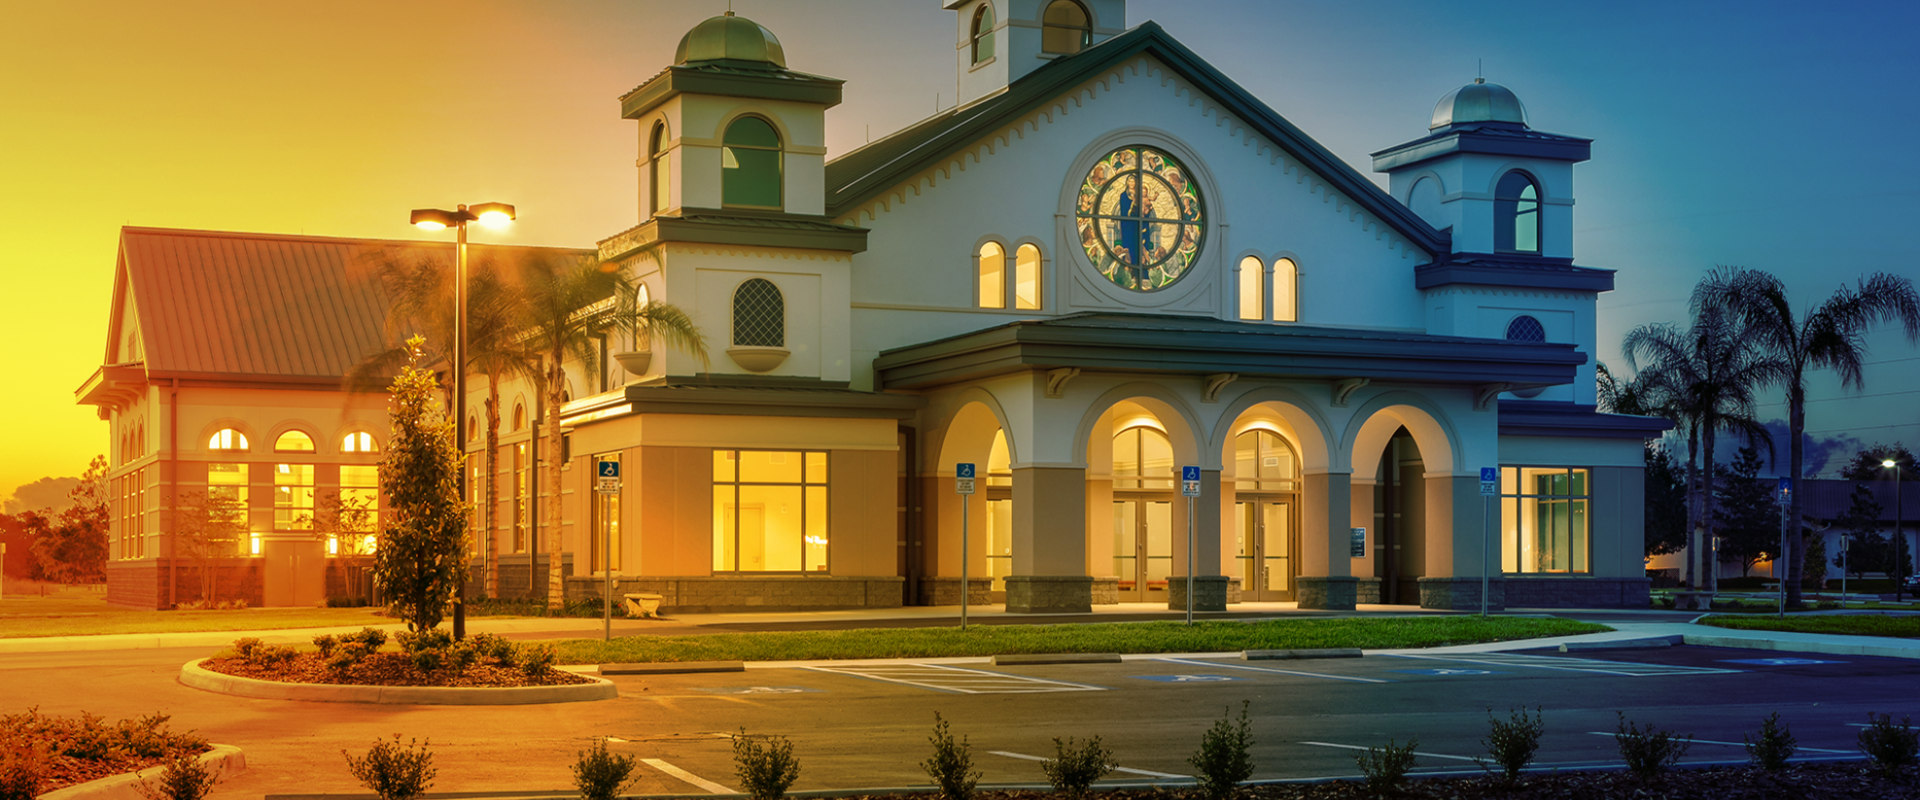 Do Churches in Bradenton, Florida Offer Outreach Programs for Those in Need?